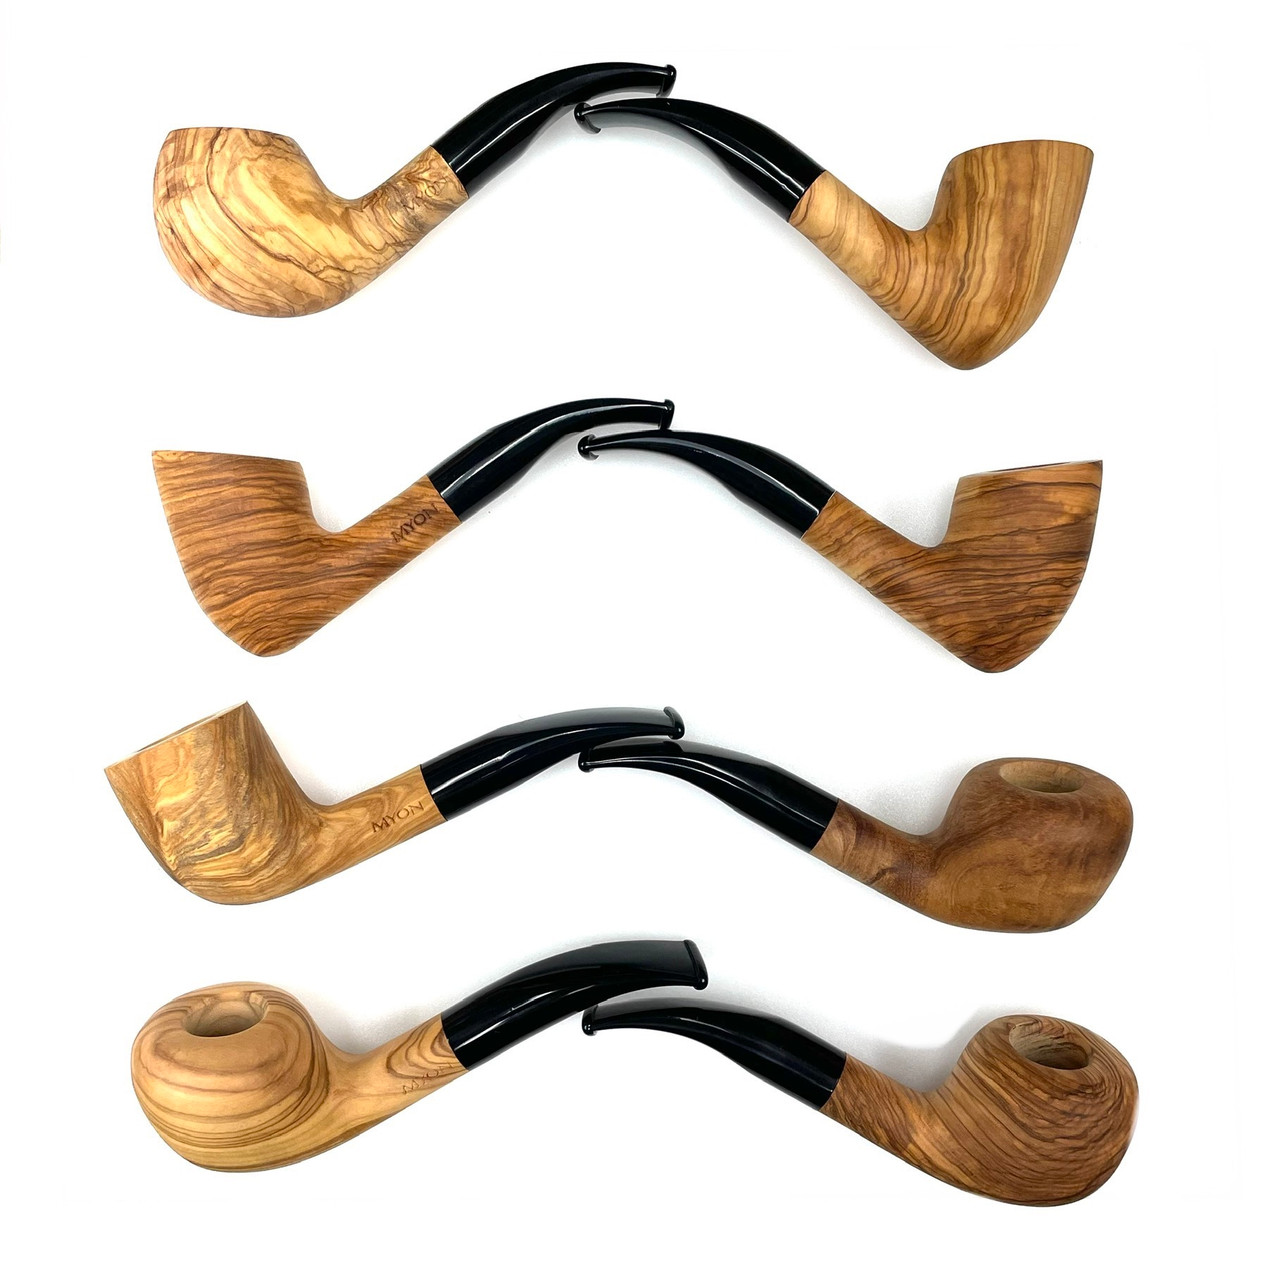 German Olive Wood Tobacco Pipes 3mm Stem 1 Count Assorted - Paykoc Pipes